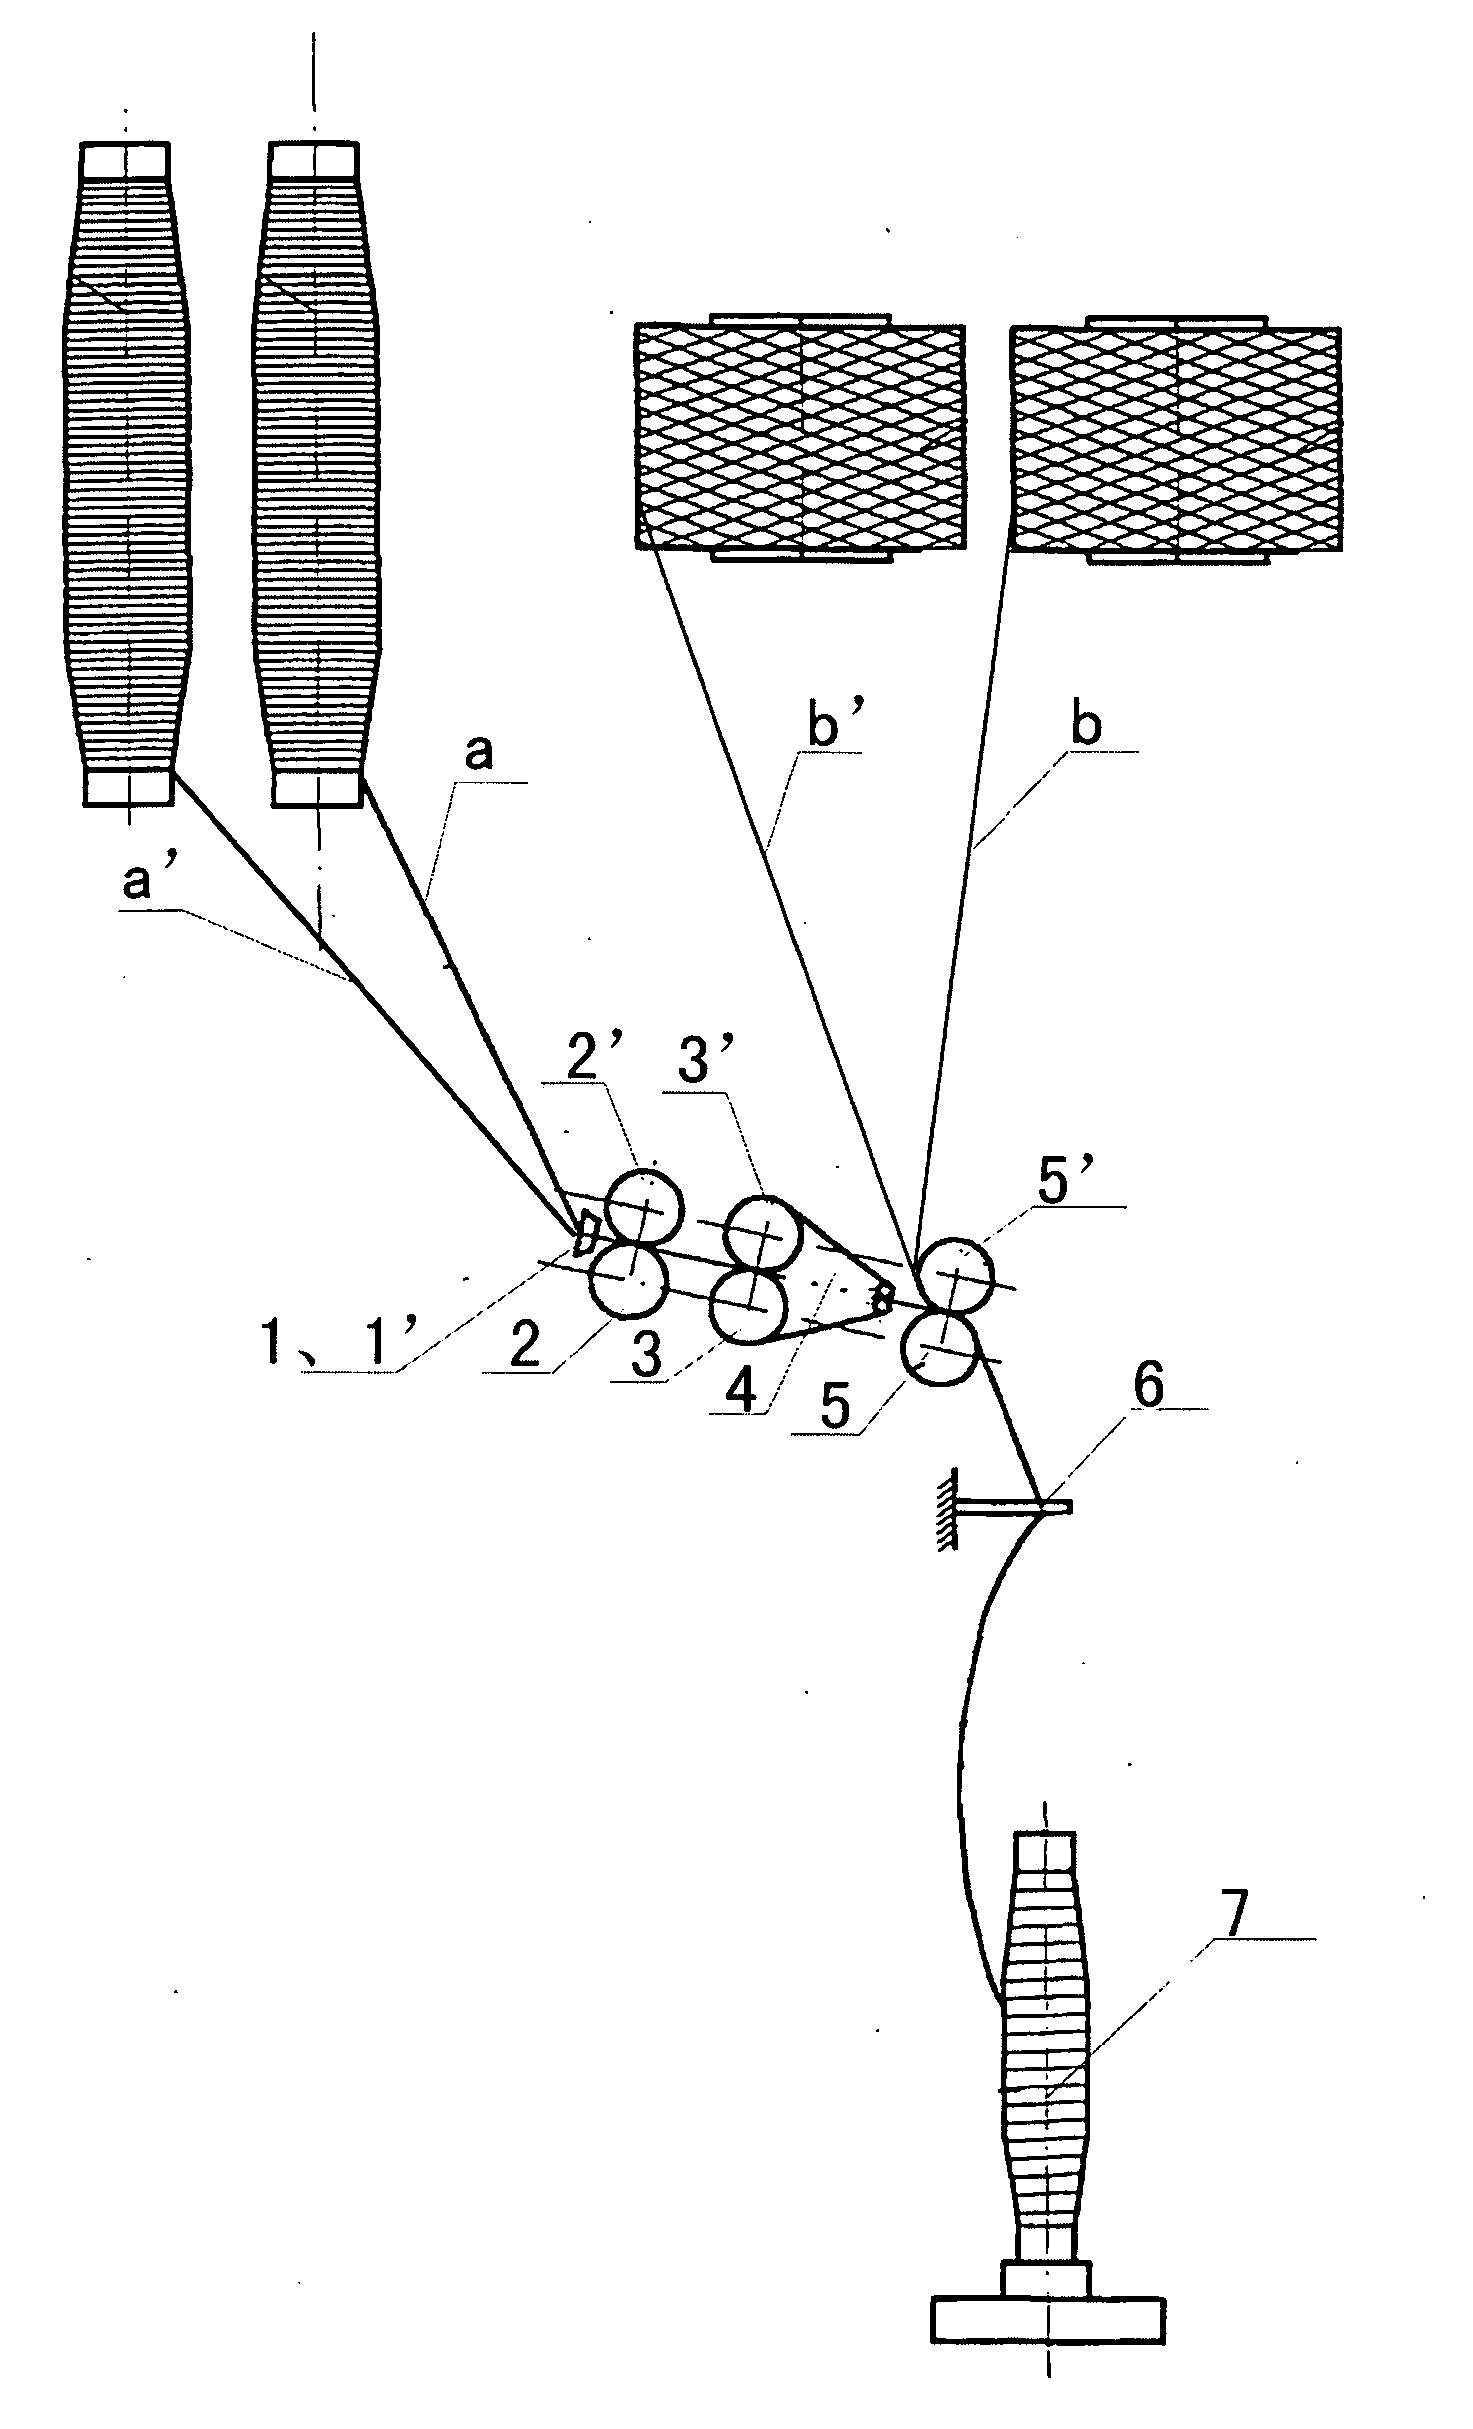 Embedded type system positioning spinning method